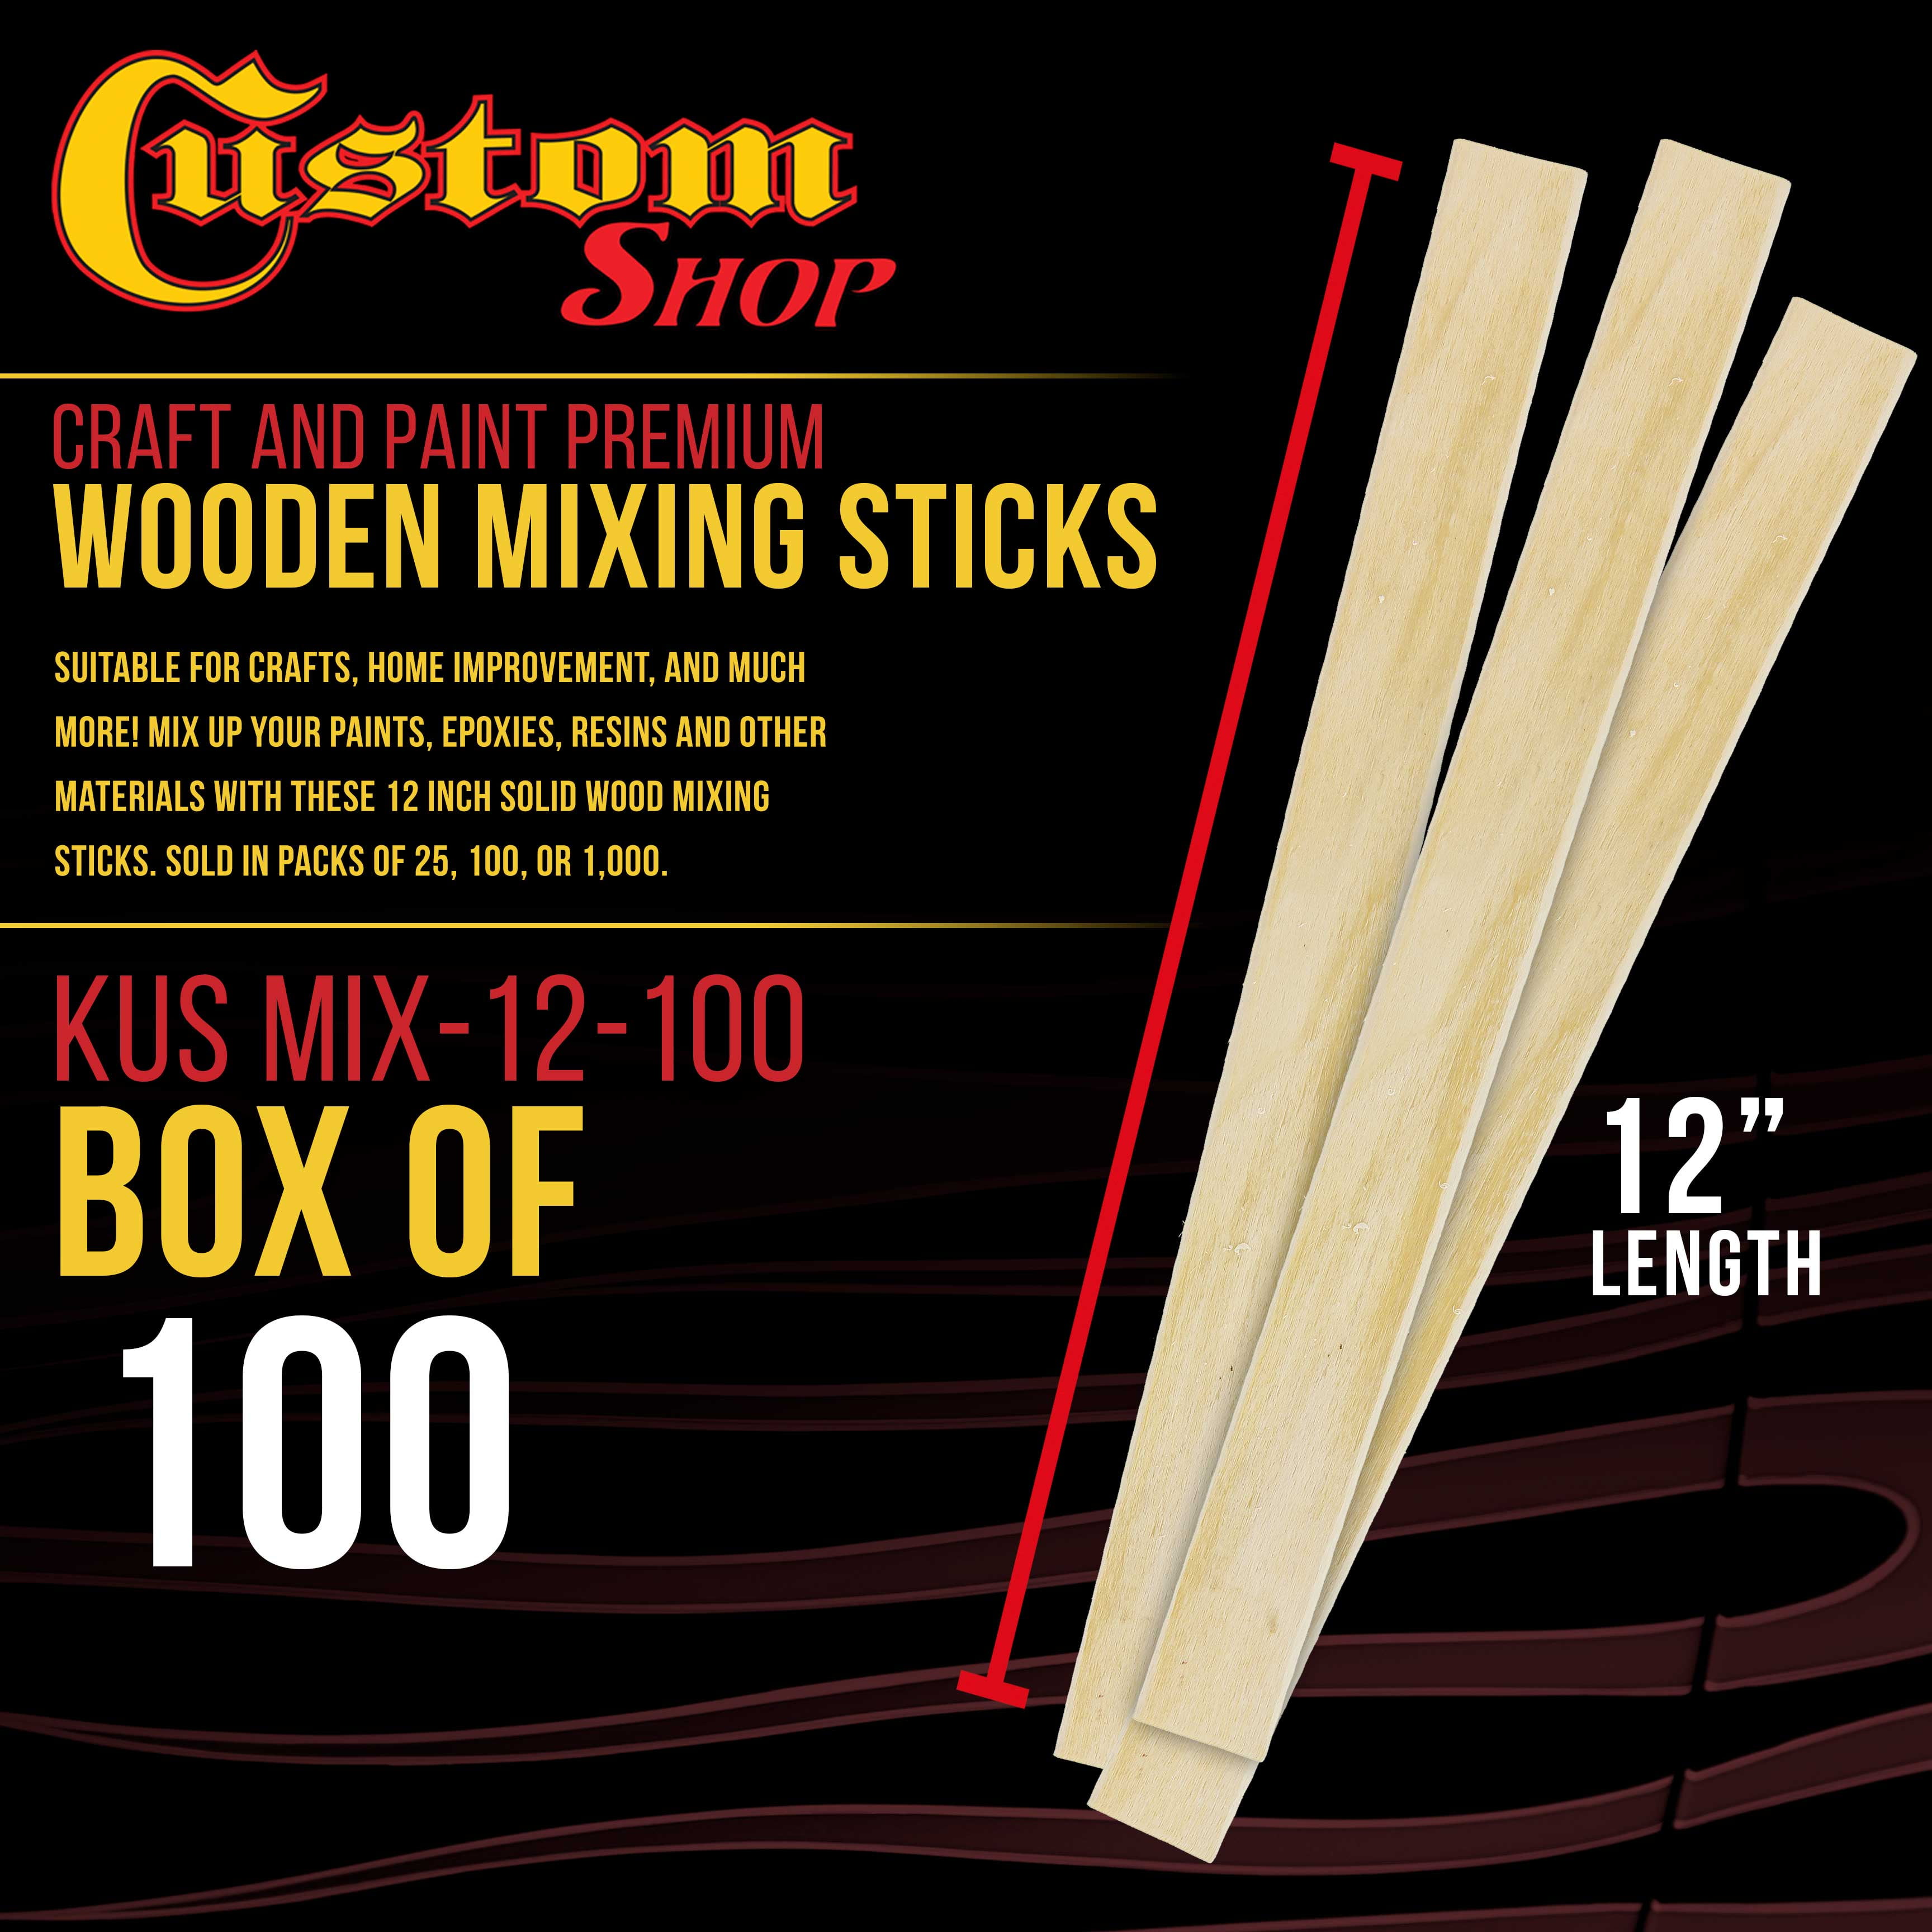 12 Inch Wood Paint Stir Sticks, 500 Pack of Paint Stirrers, Garden  Markers, Craft and Hobby Supply, Mixing Sticks for Epoxy Resin by  CraftySticks